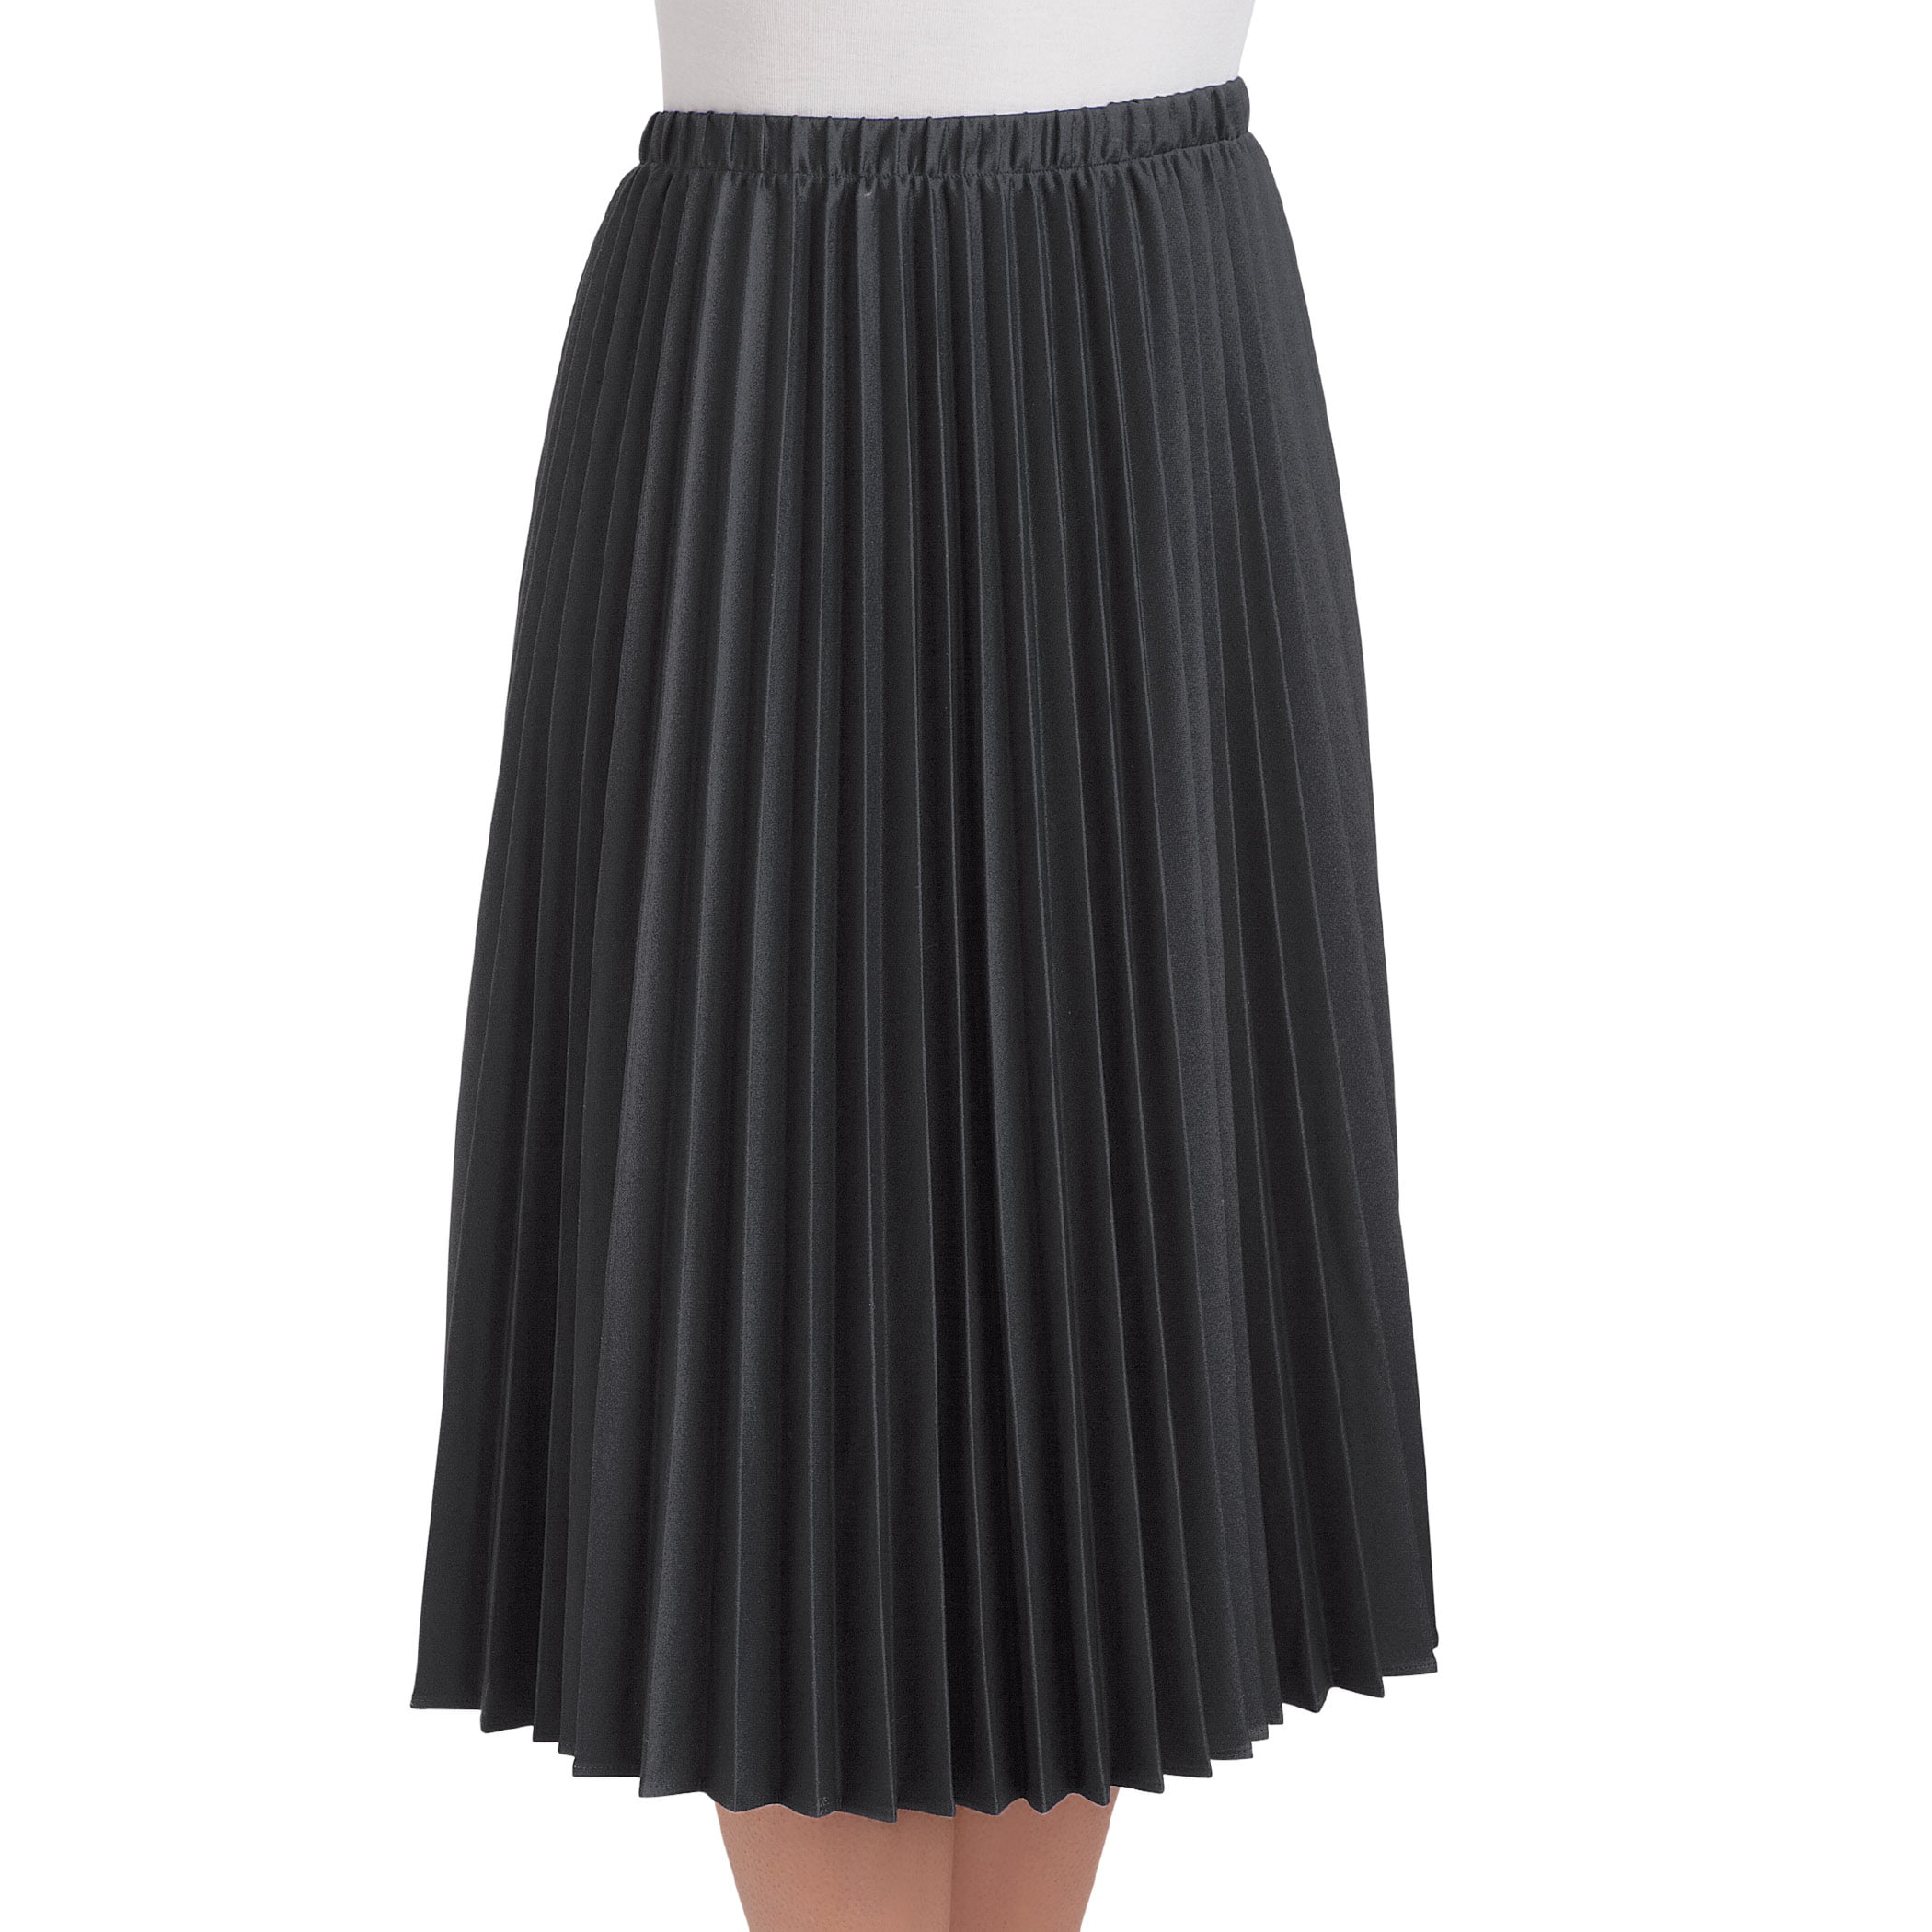 Collections Etc Women\'s Classic Pleated Mid-Length Jersey Knit Midi Skirt  with Comfortable Elastic Waistband, Black, Medium - Made in The USA